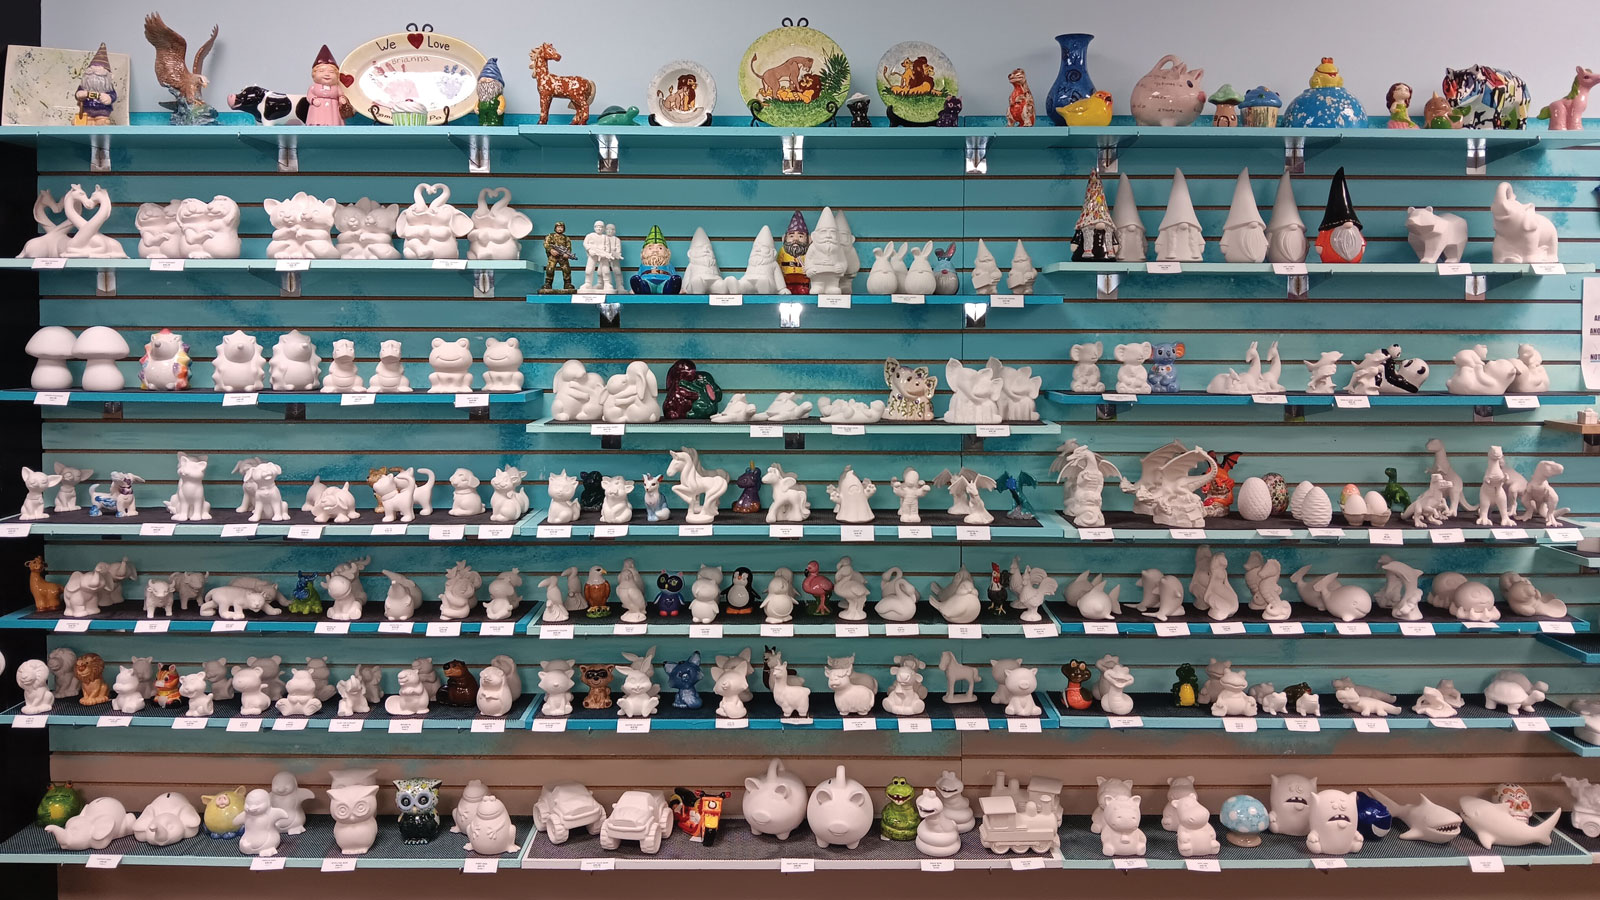 Large Wall of Shelves Filled with Unpainted Pottery Sculptures